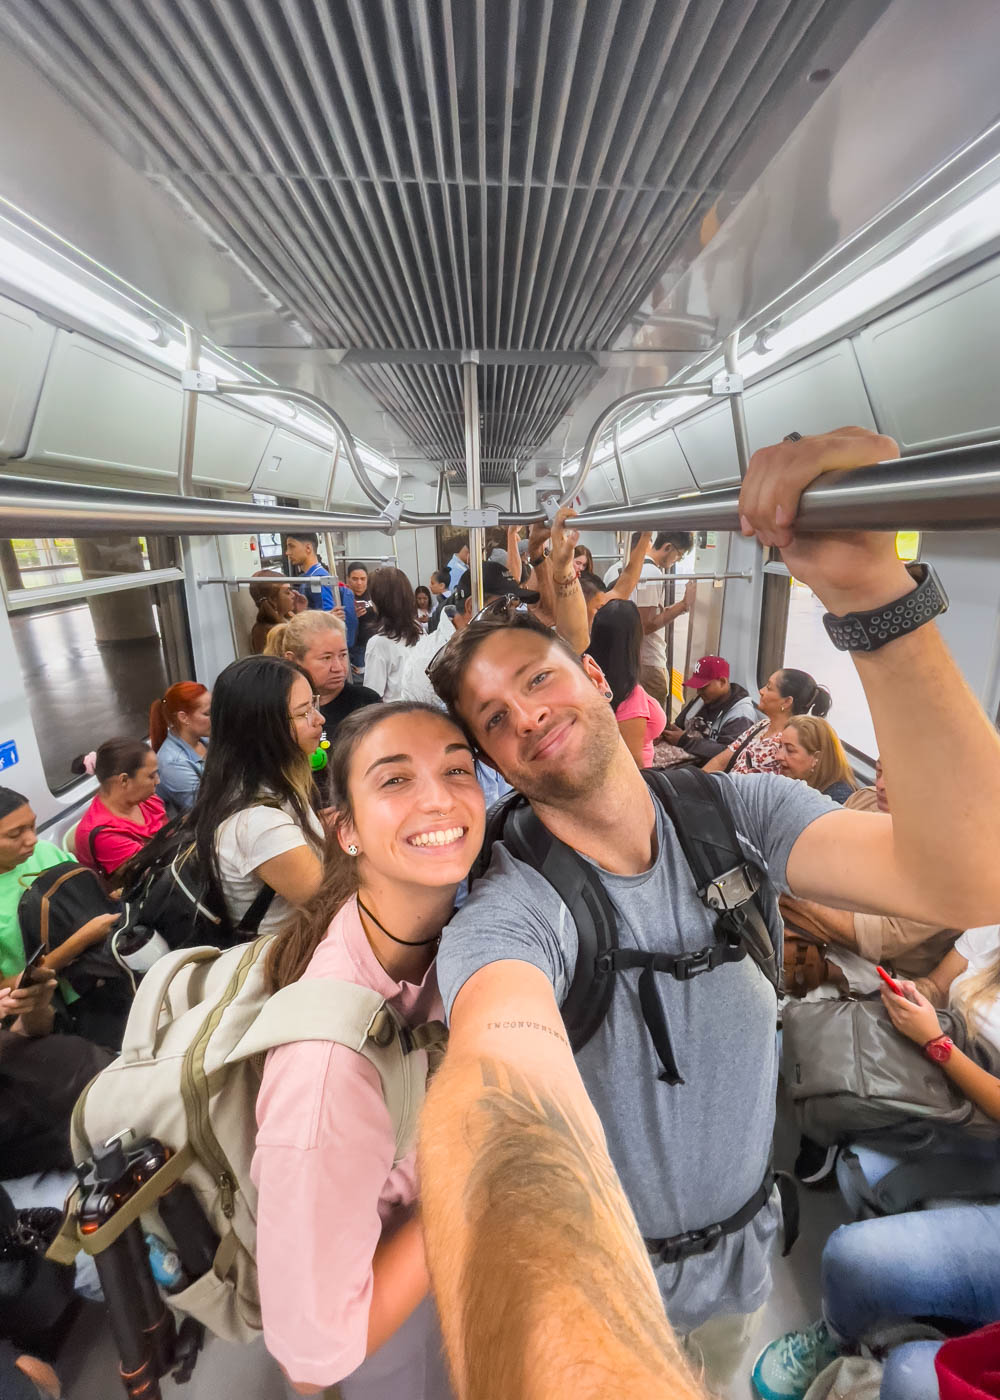 Ryan and Sara taking a selfie inside a car of the Medellin metro train.